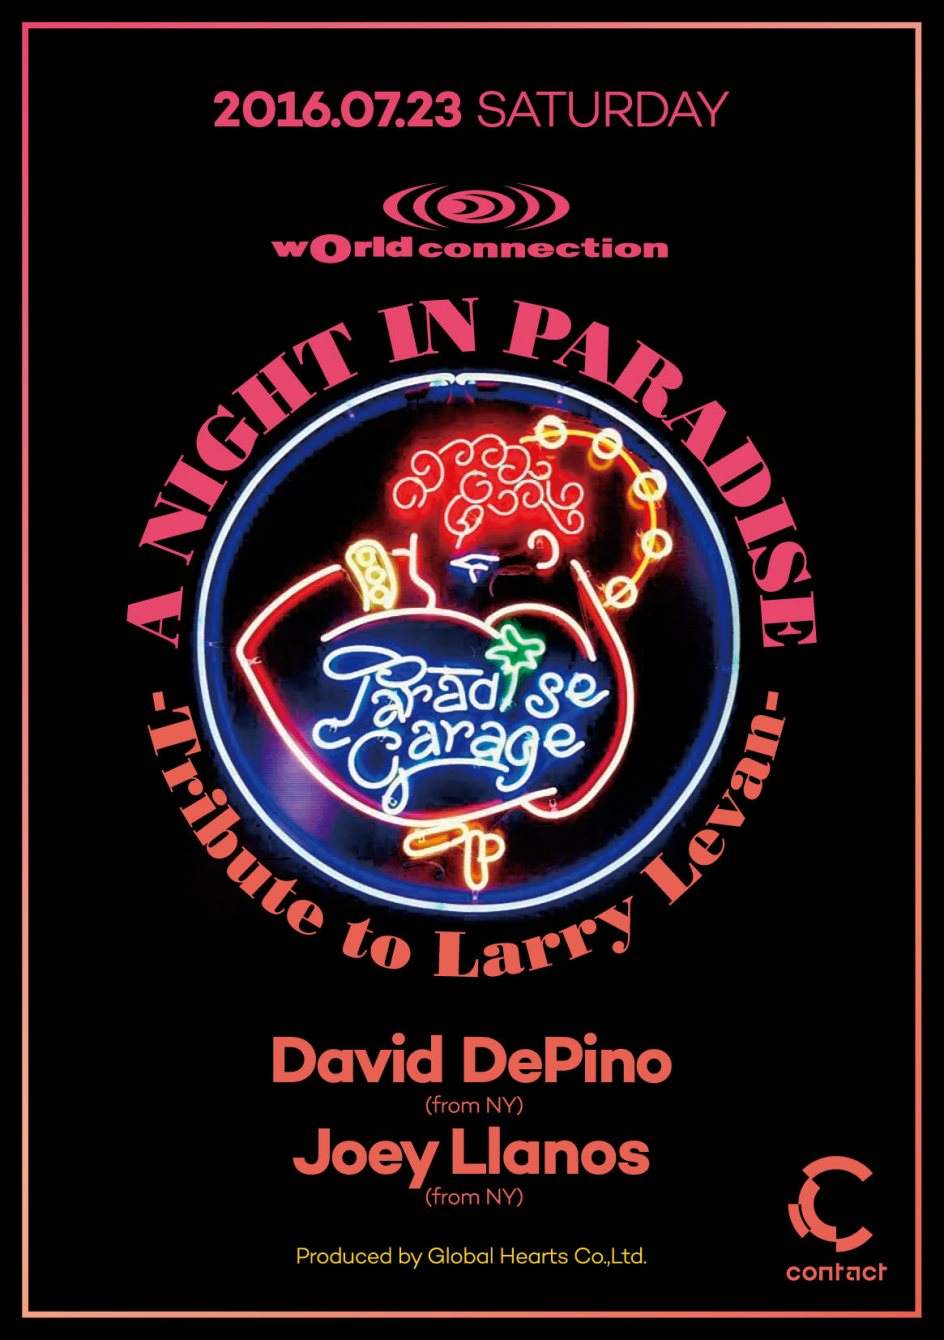 World Connection A Night In Paradise -Tribute to Larry Levan- - フライヤー表